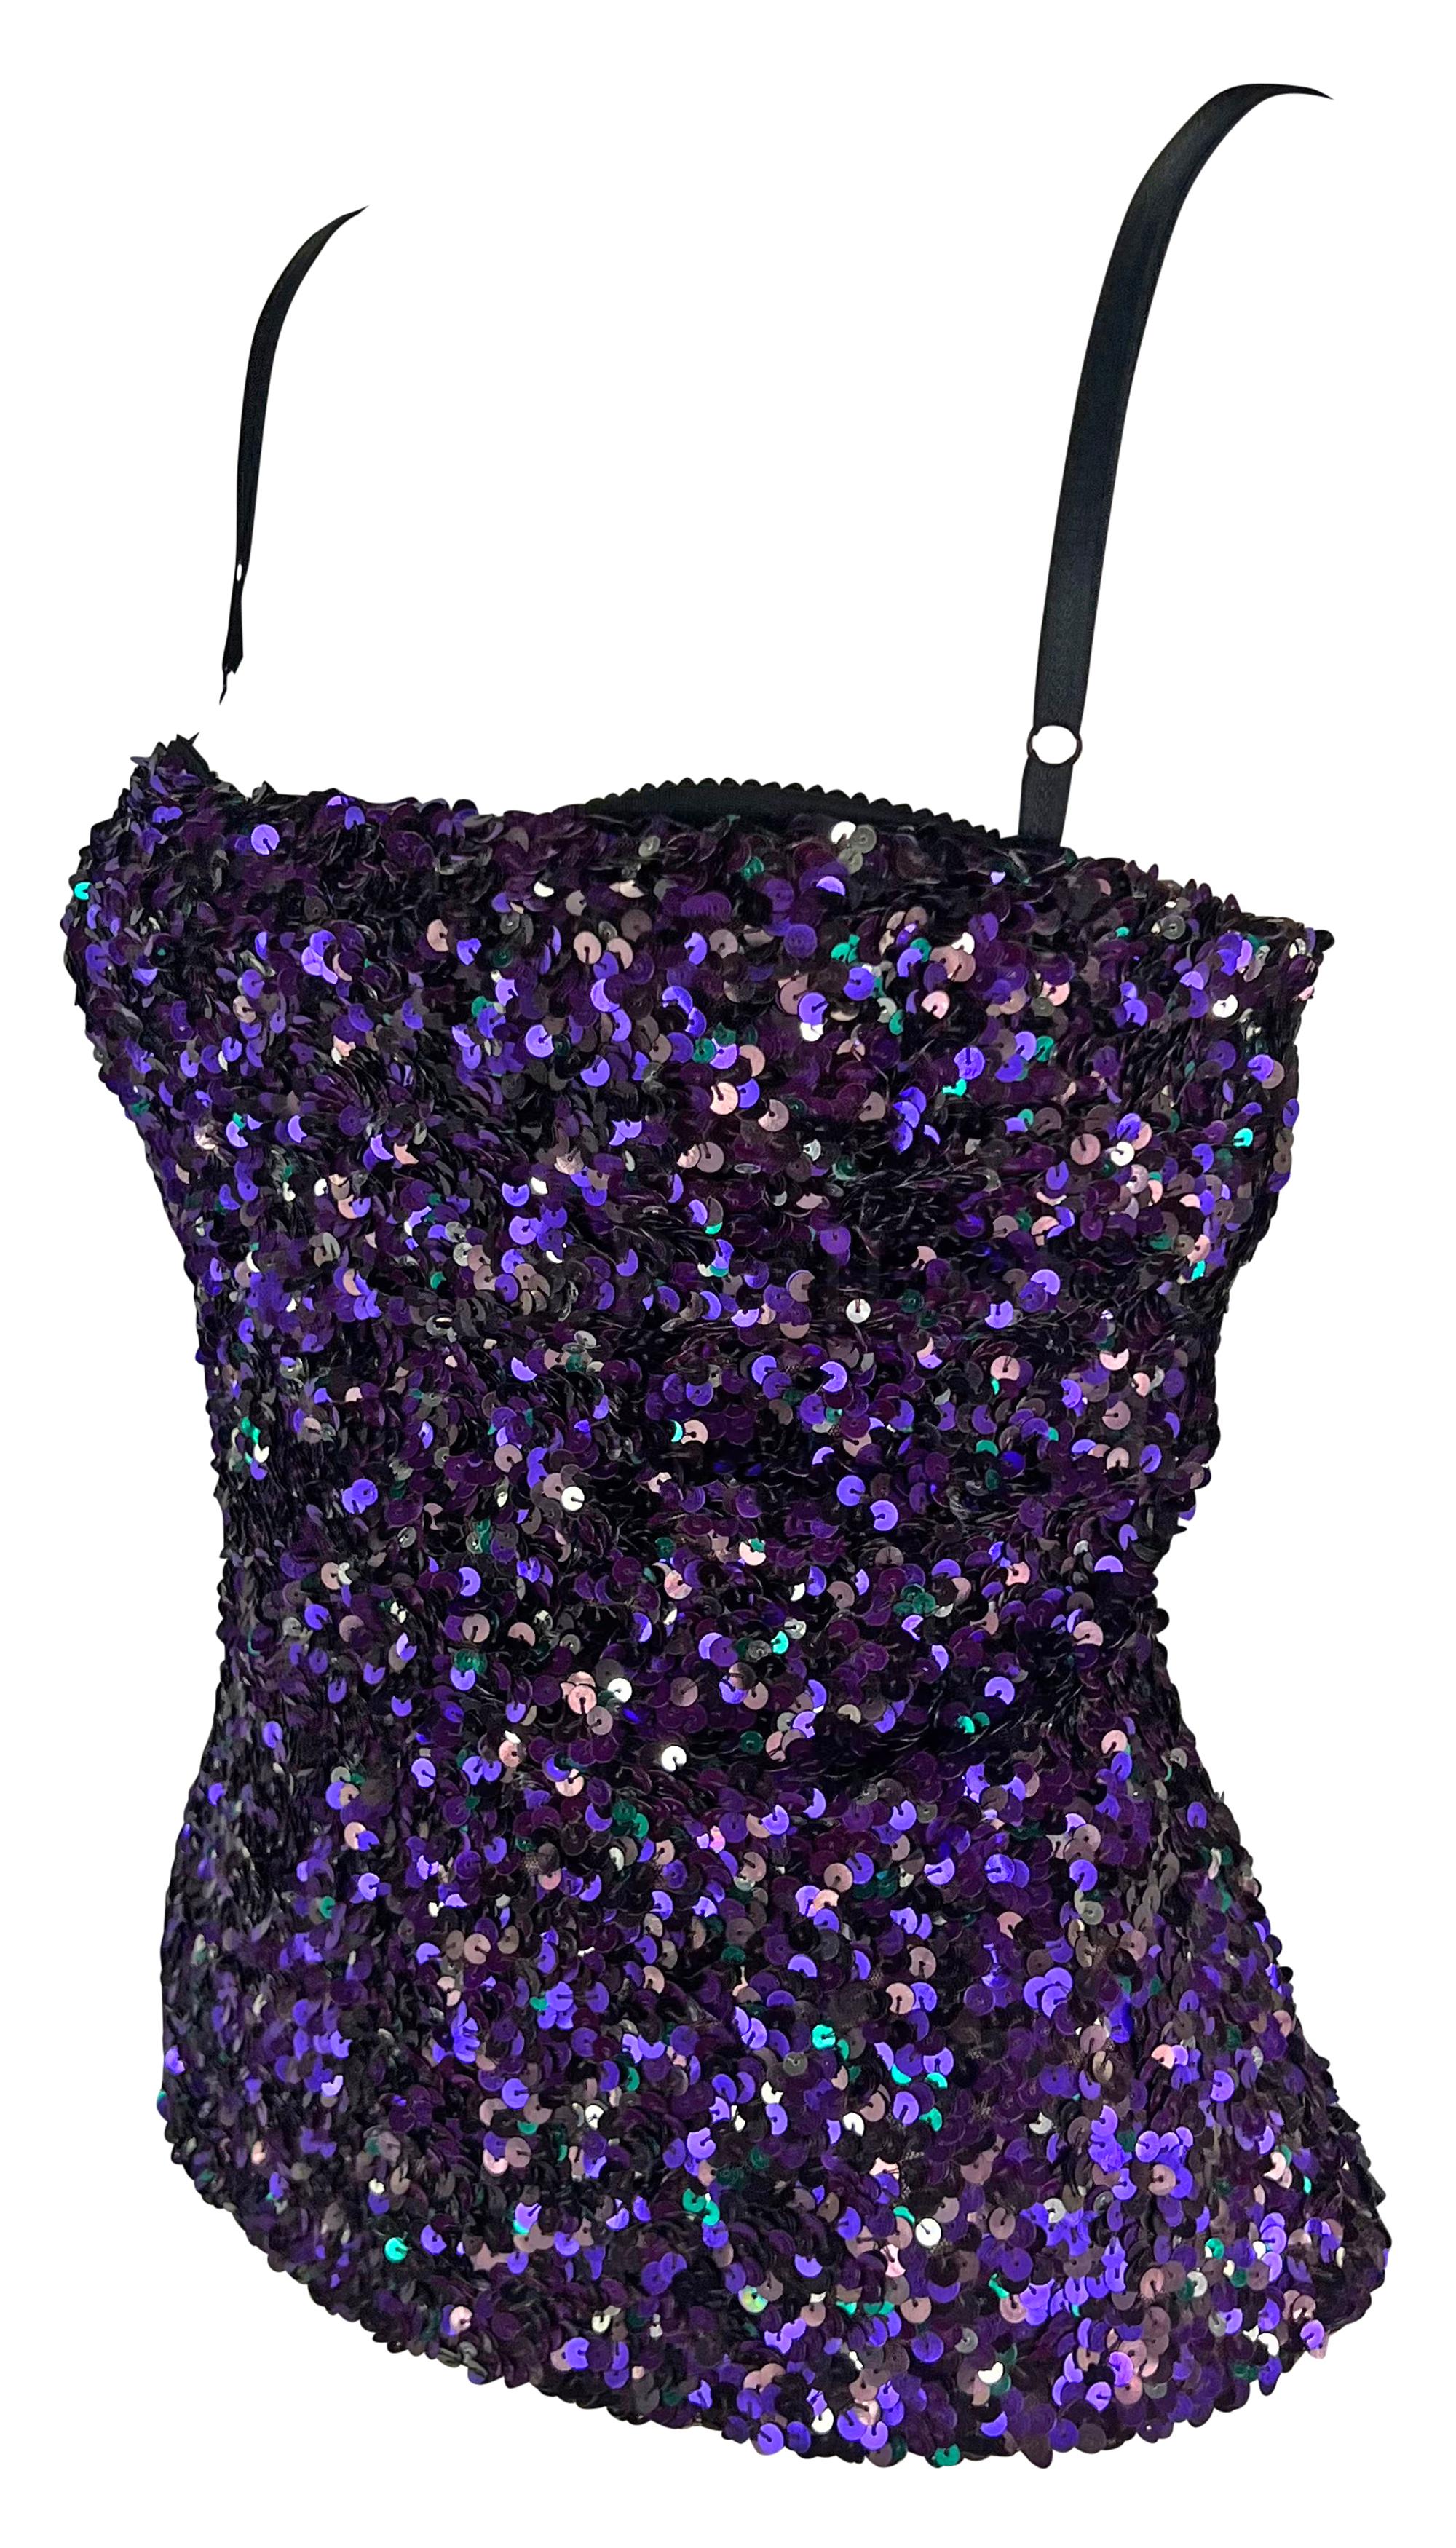 F/W 2000 Dolce & Gabbana Purple Sequin Bodycon Bustier Bra Tube Top  In Excellent Condition For Sale In West Hollywood, CA